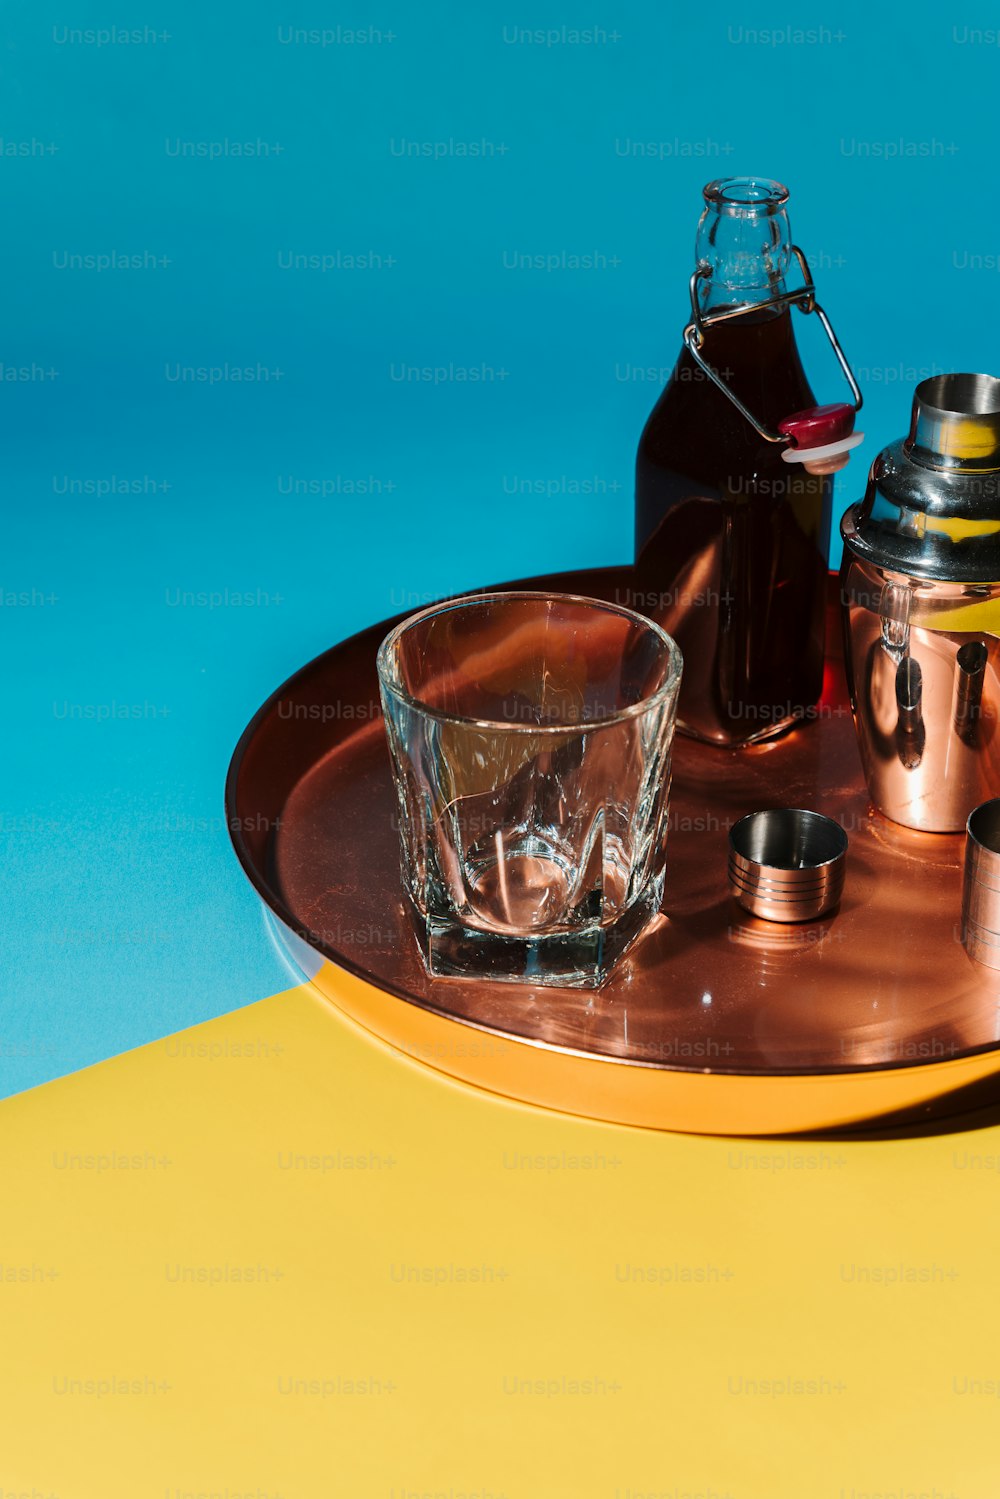 a metal tray with a glass and a bottle on it